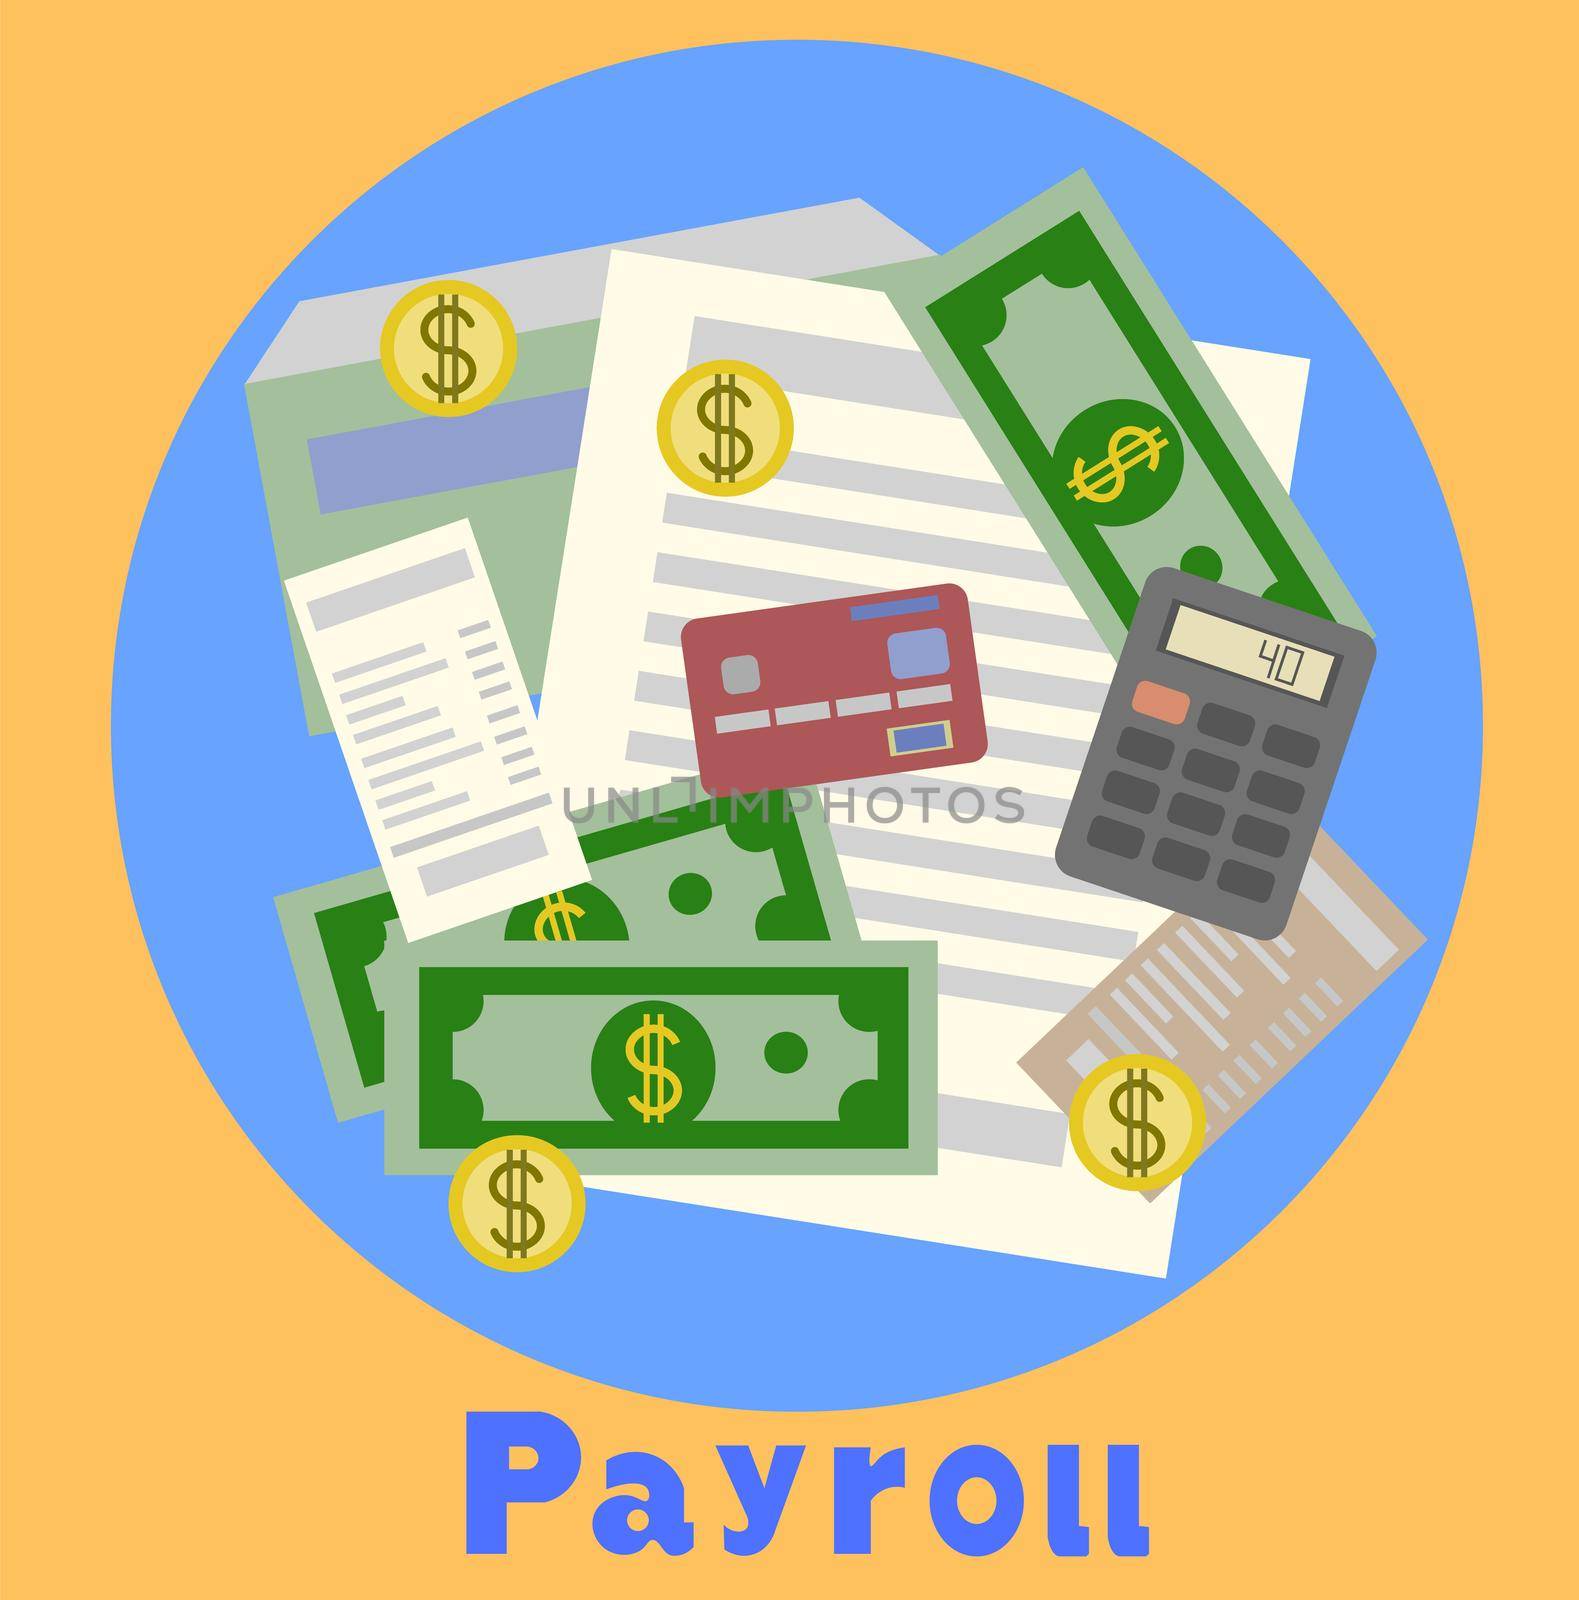 Payroll, invoice sheet flat illustration. Payroll template, calculate salary, budget concepts. Modern flat design for web banners, web sites, infographics. Creative illustration by Alxyzt